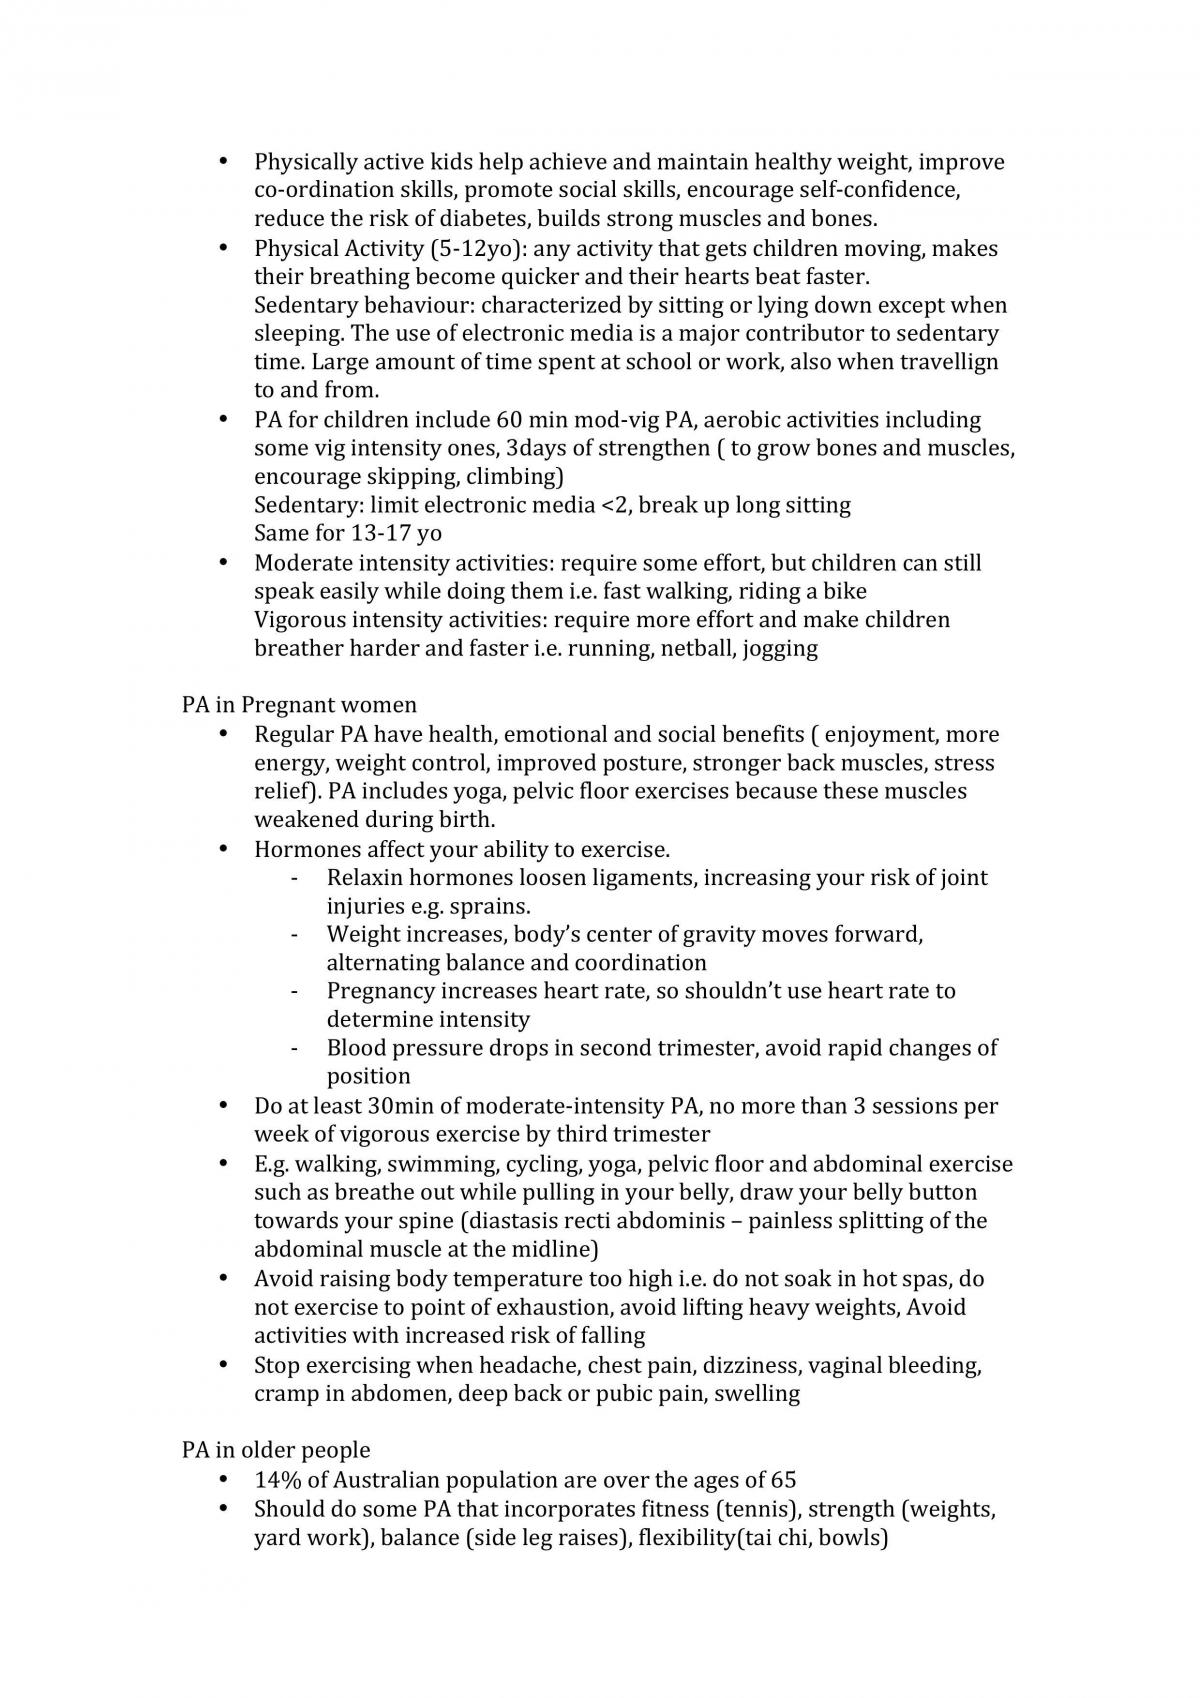 GENM0703   Exam Study Notes - Page 19